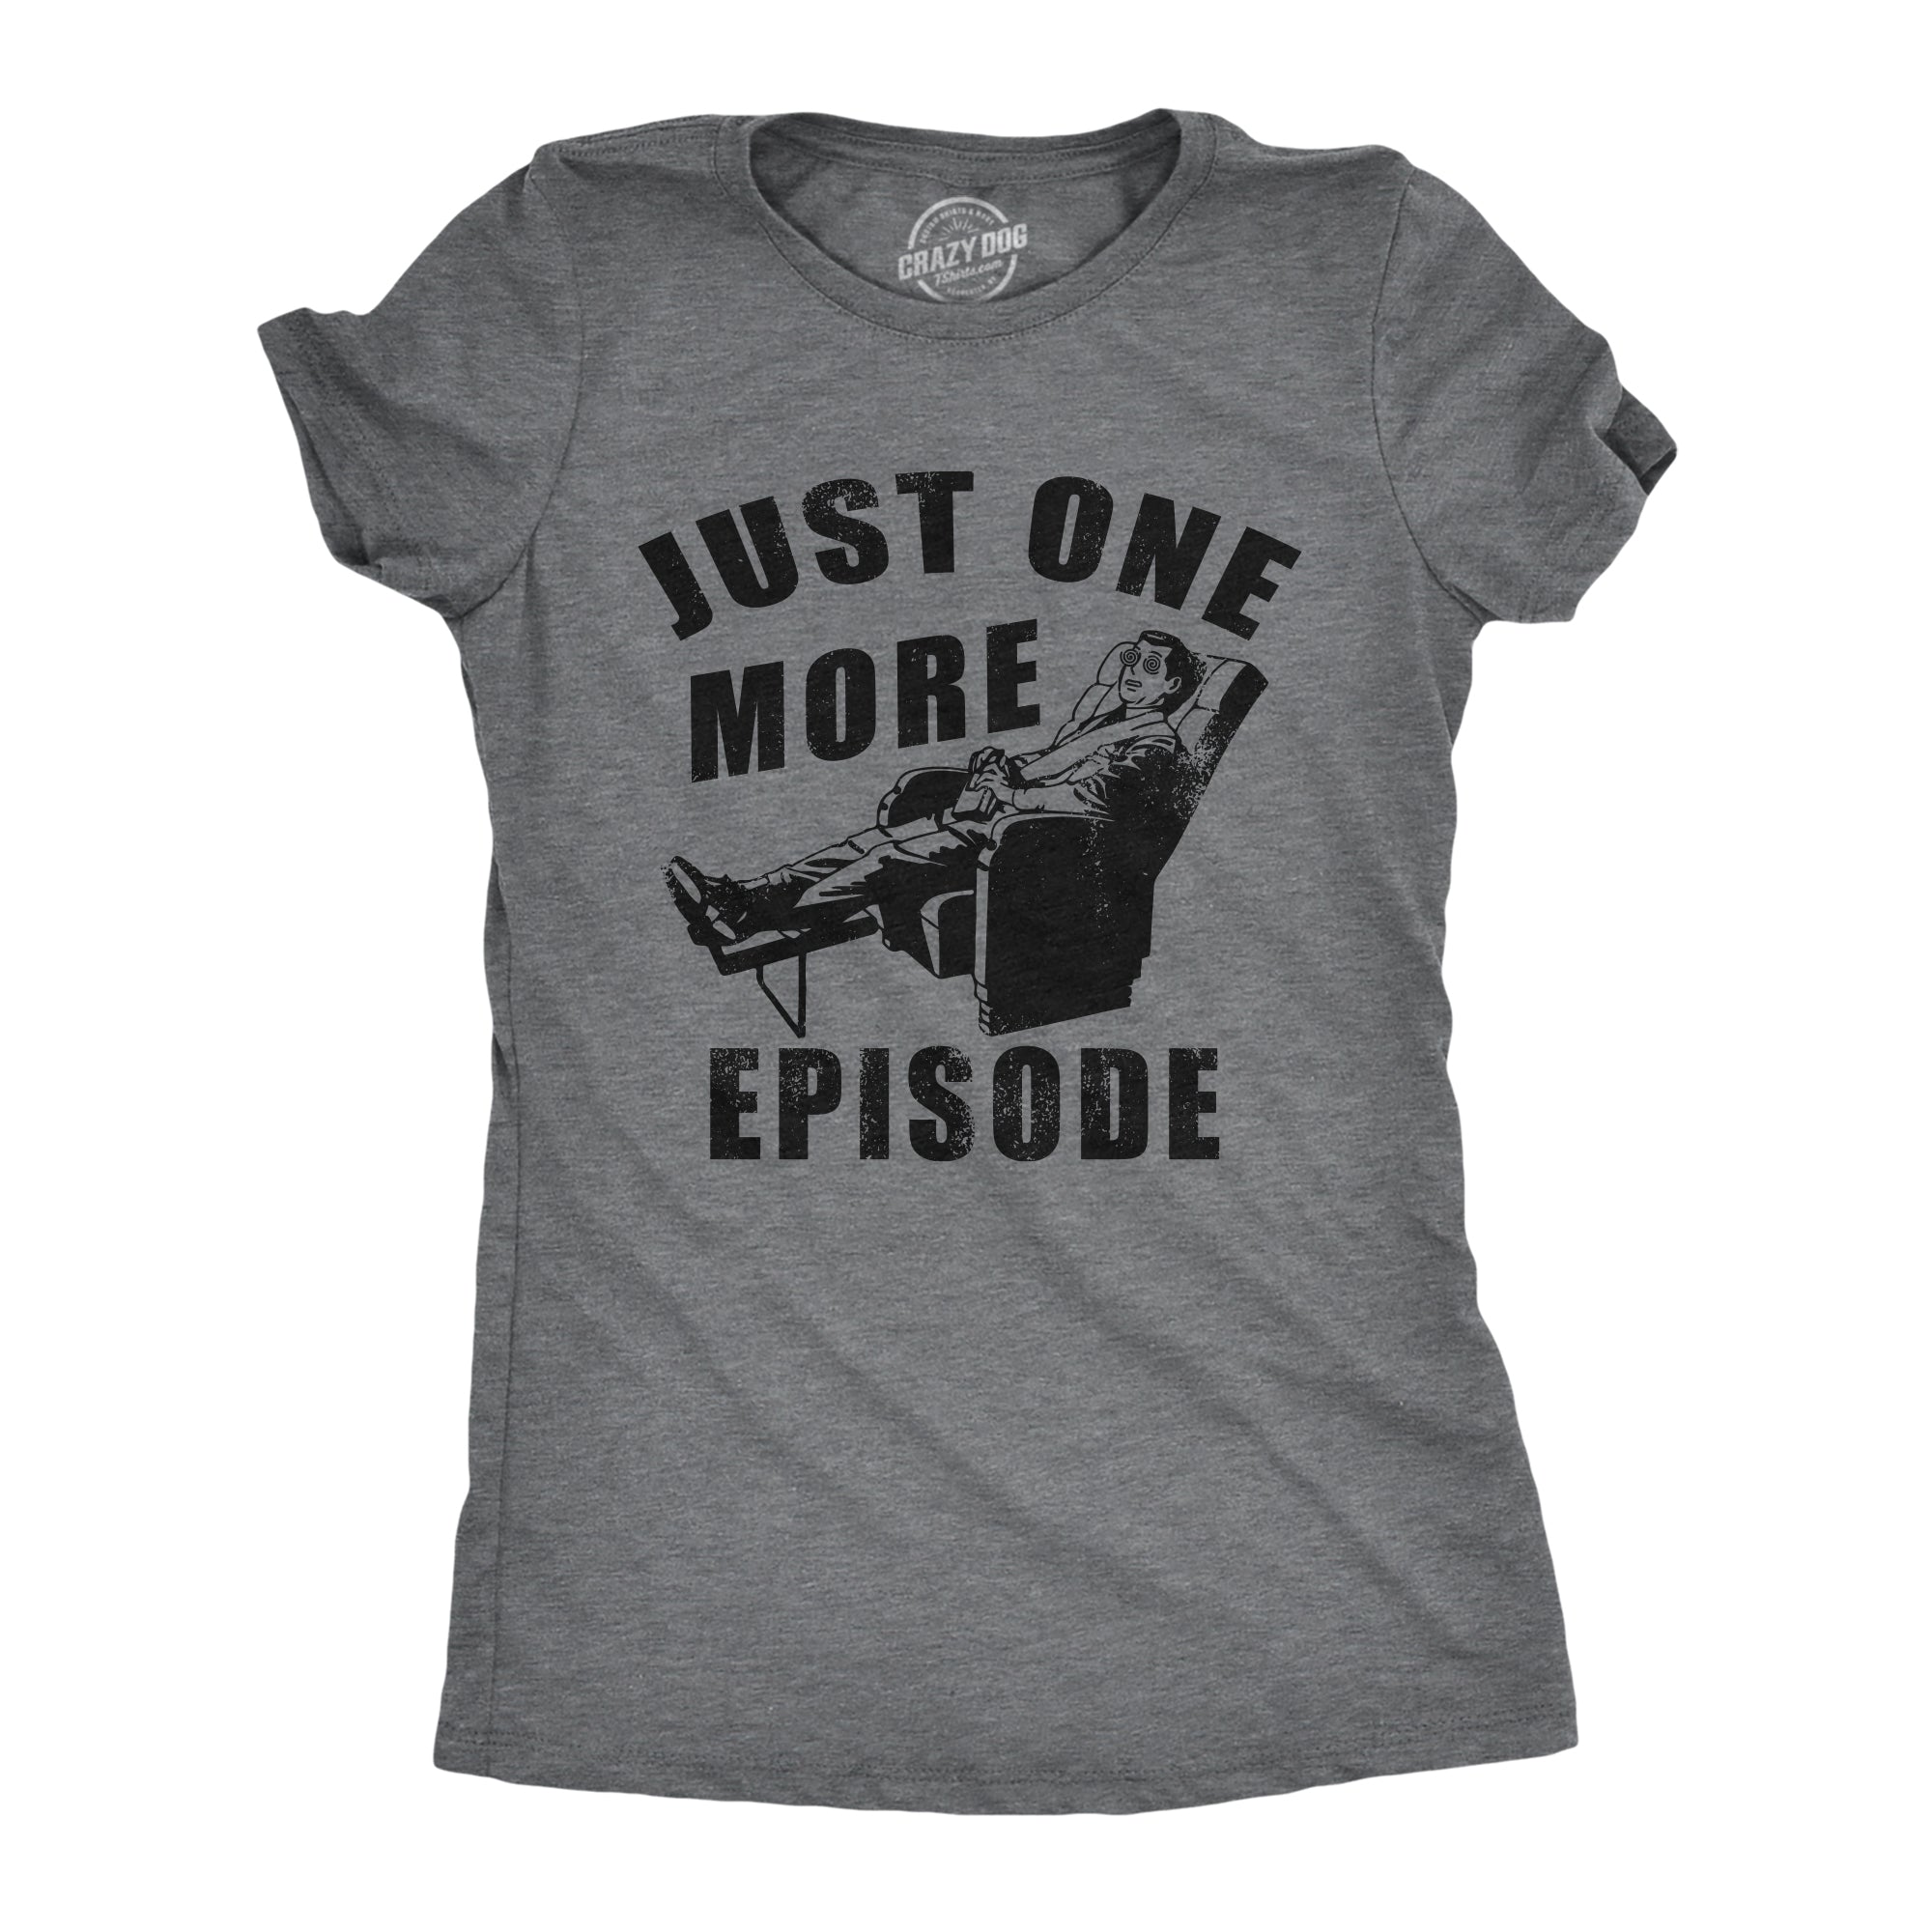 Funny Dark Heather Grey - EPISODE Just One More Episode Womens T Shirt Nerdy TV & Movies sarcastic Tee